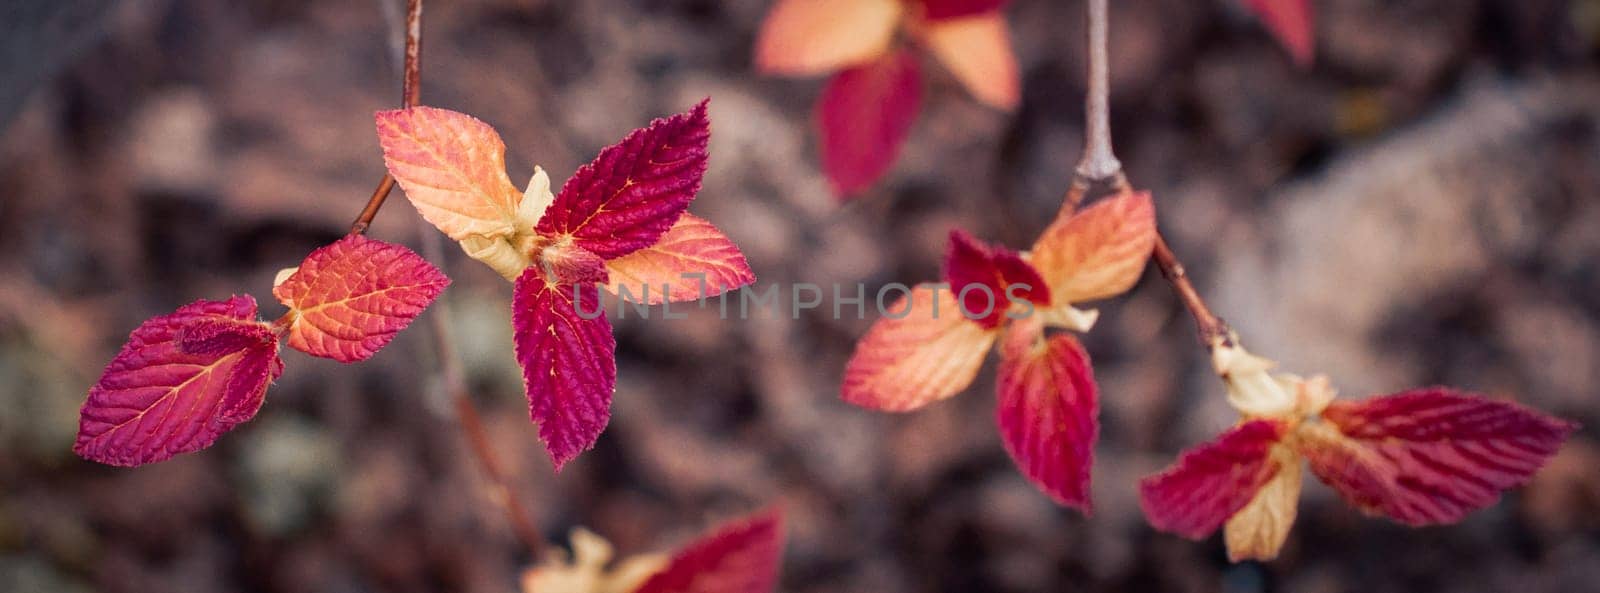 Close up twig with autumn leaves concept photo. Young branches, stems in springtime. Front view photography with blurred background. High quality picture for wallpaper